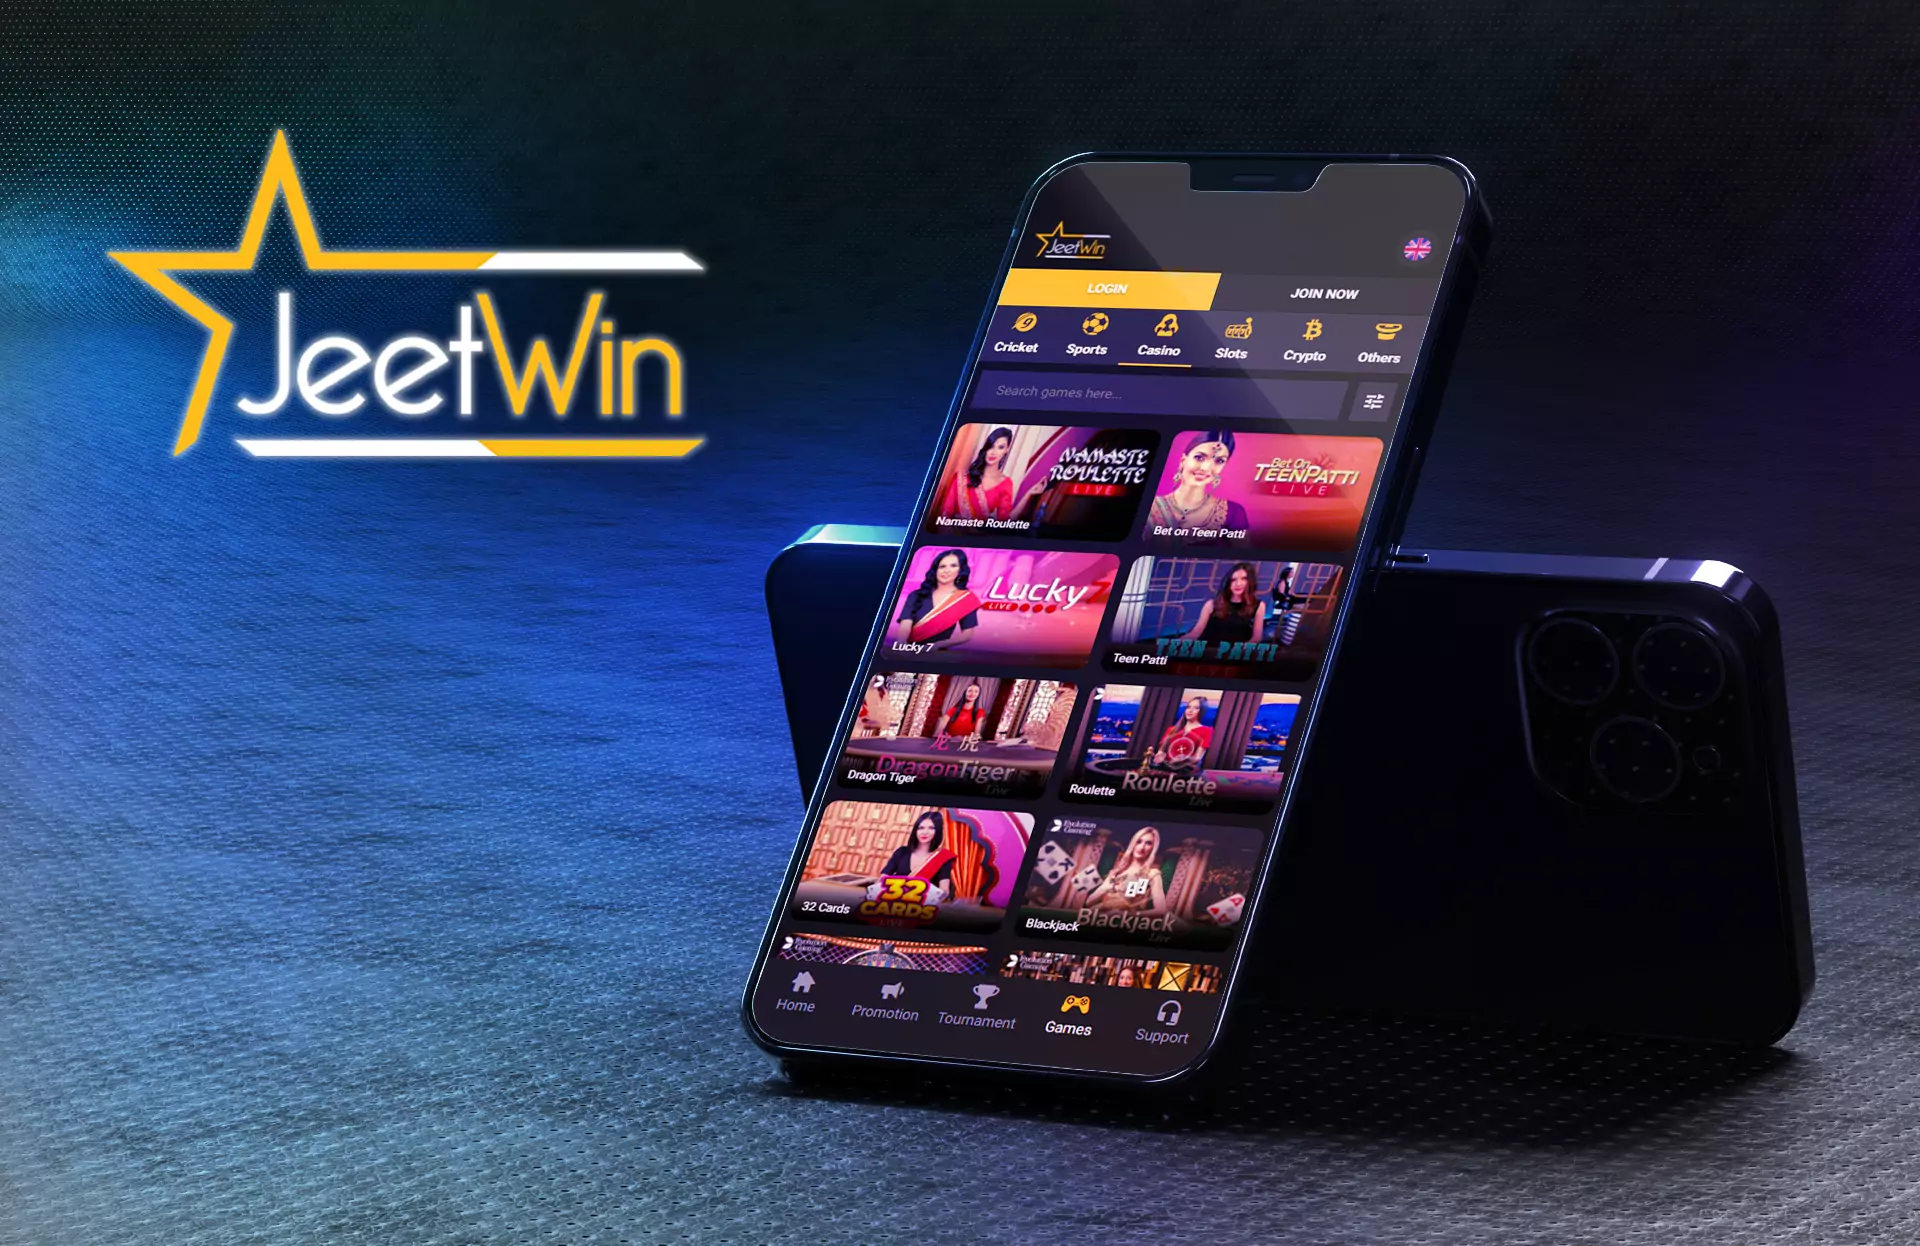 Jeetwin Casino provides over 700 table games and slots and a welcome bonus of up to 20000 INR.